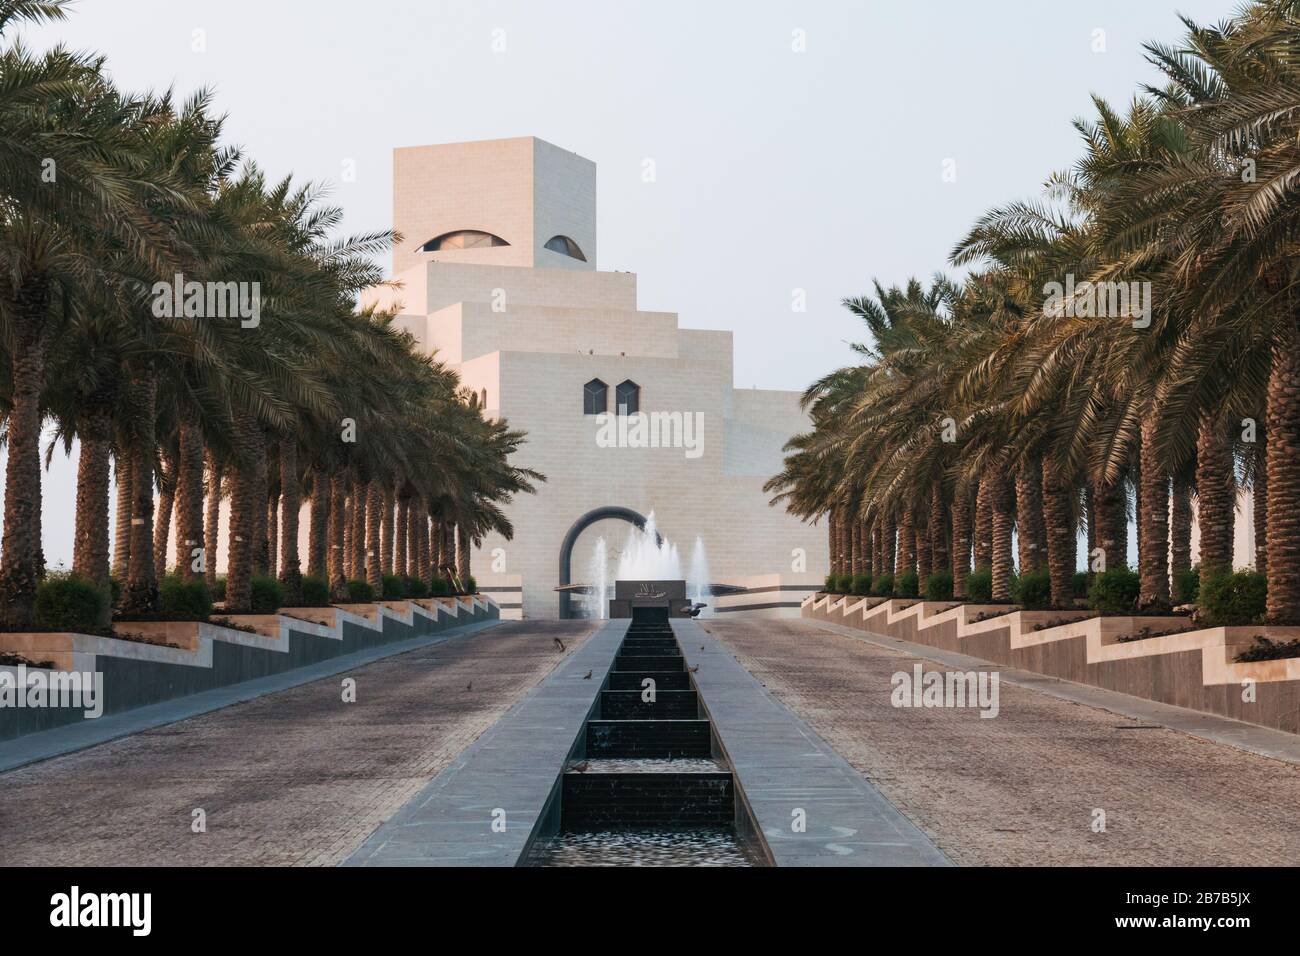 The Museum of Islamic Art, Doha, featuring Islamic architectural influence in a cuboid appearance, designed by Ieoh Ming Pei Stock Photo